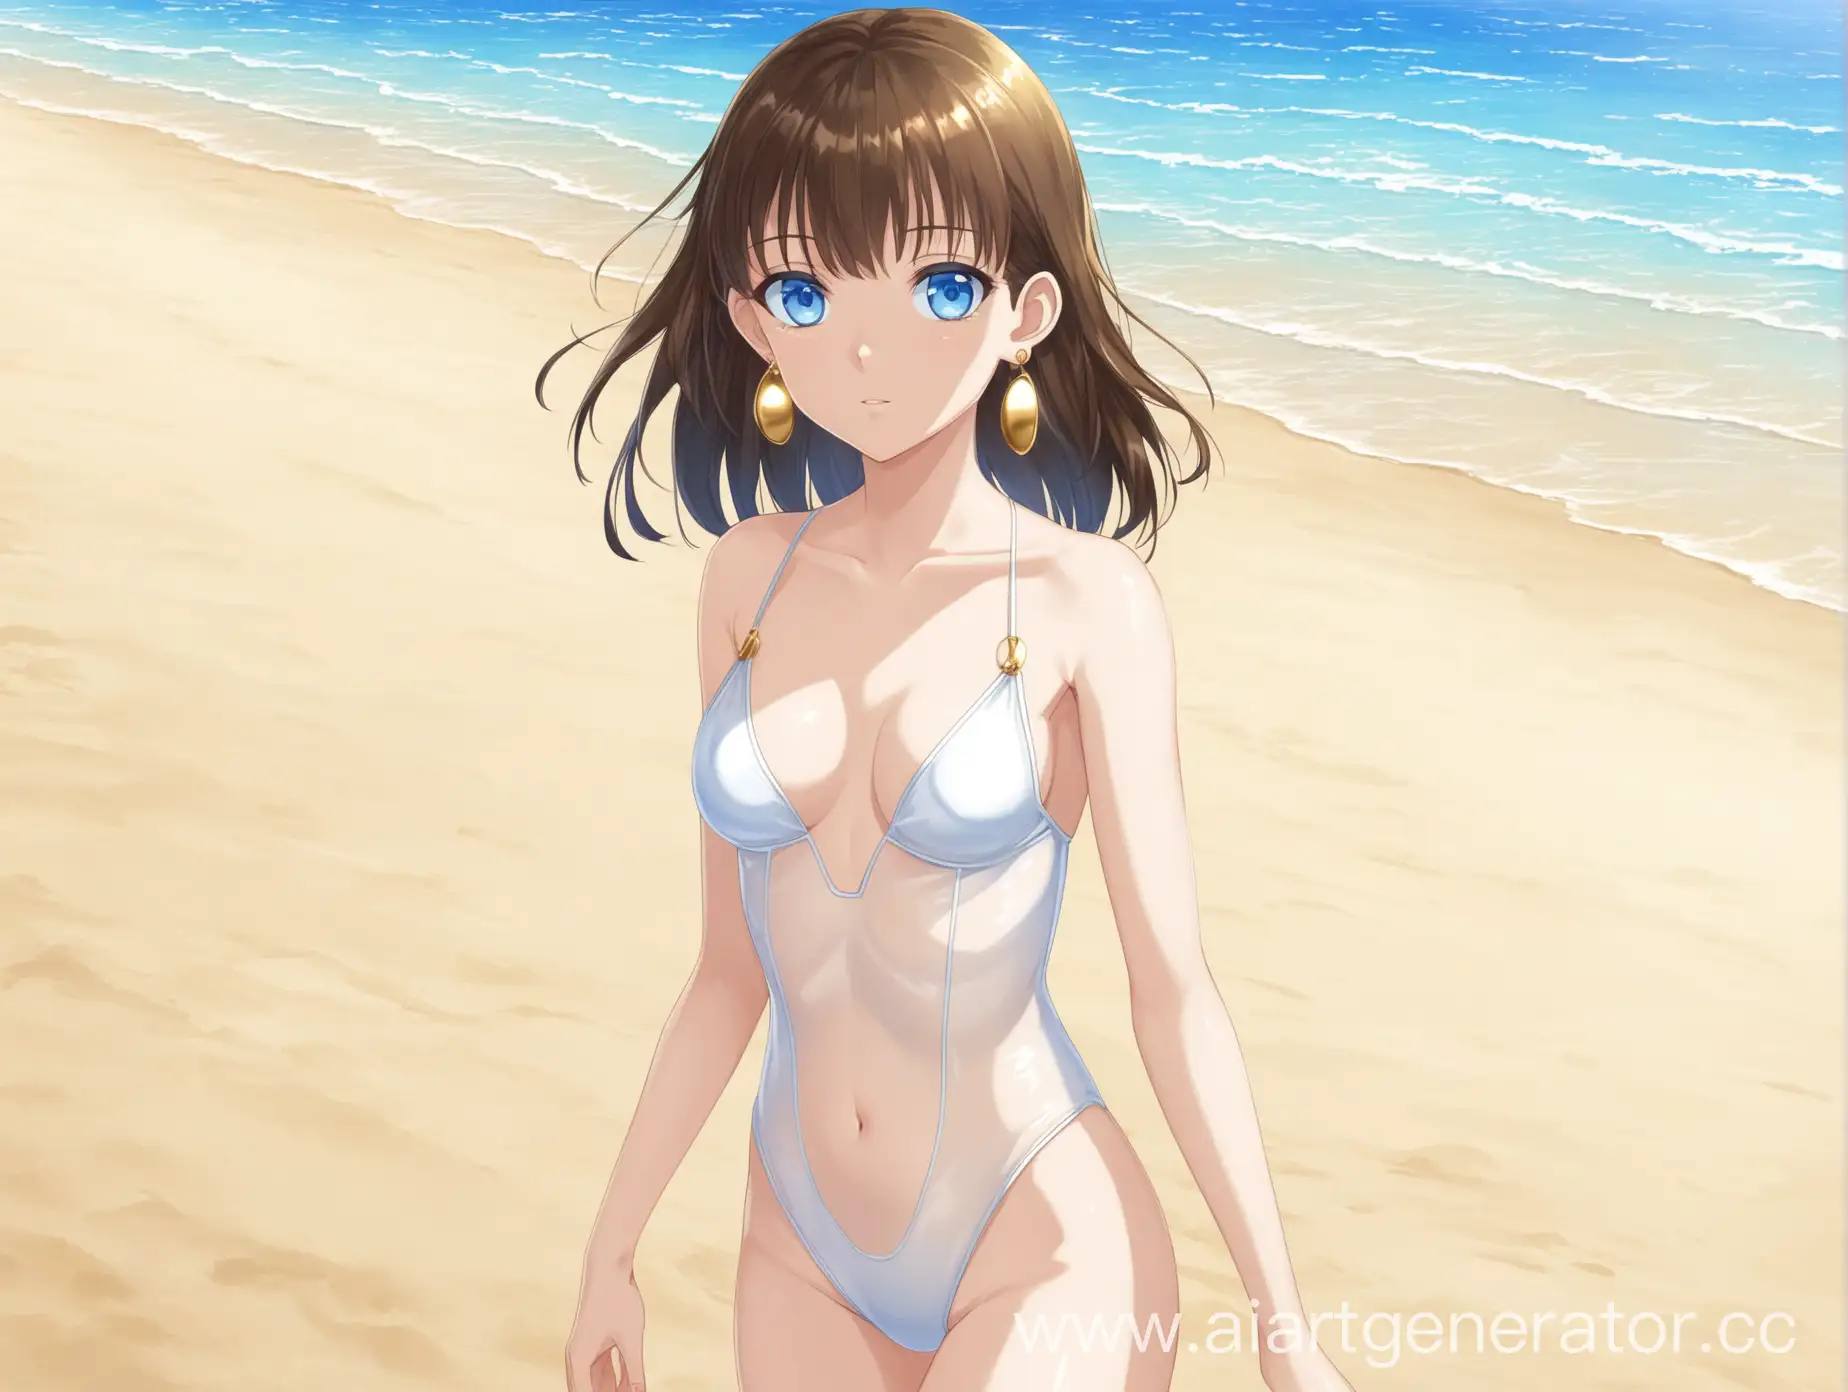 BlueEyed-Anime-Girl-in-SemiTransparent-Swimsuit-by-Sandy-Beach